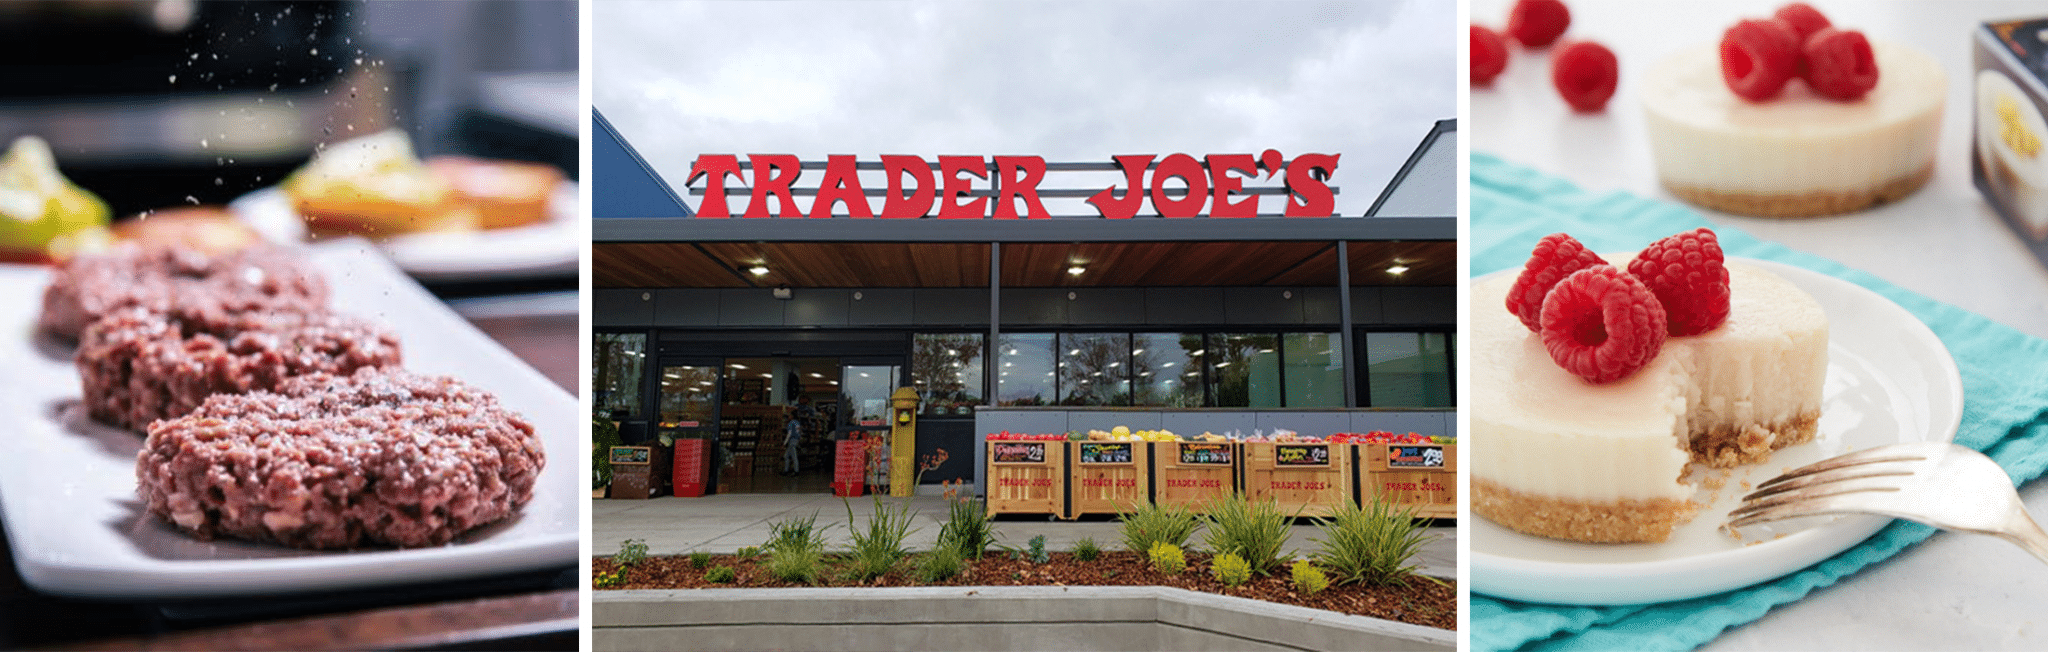 5 Exciting New Plant-Based Options You Can Find at Trader Joe’s